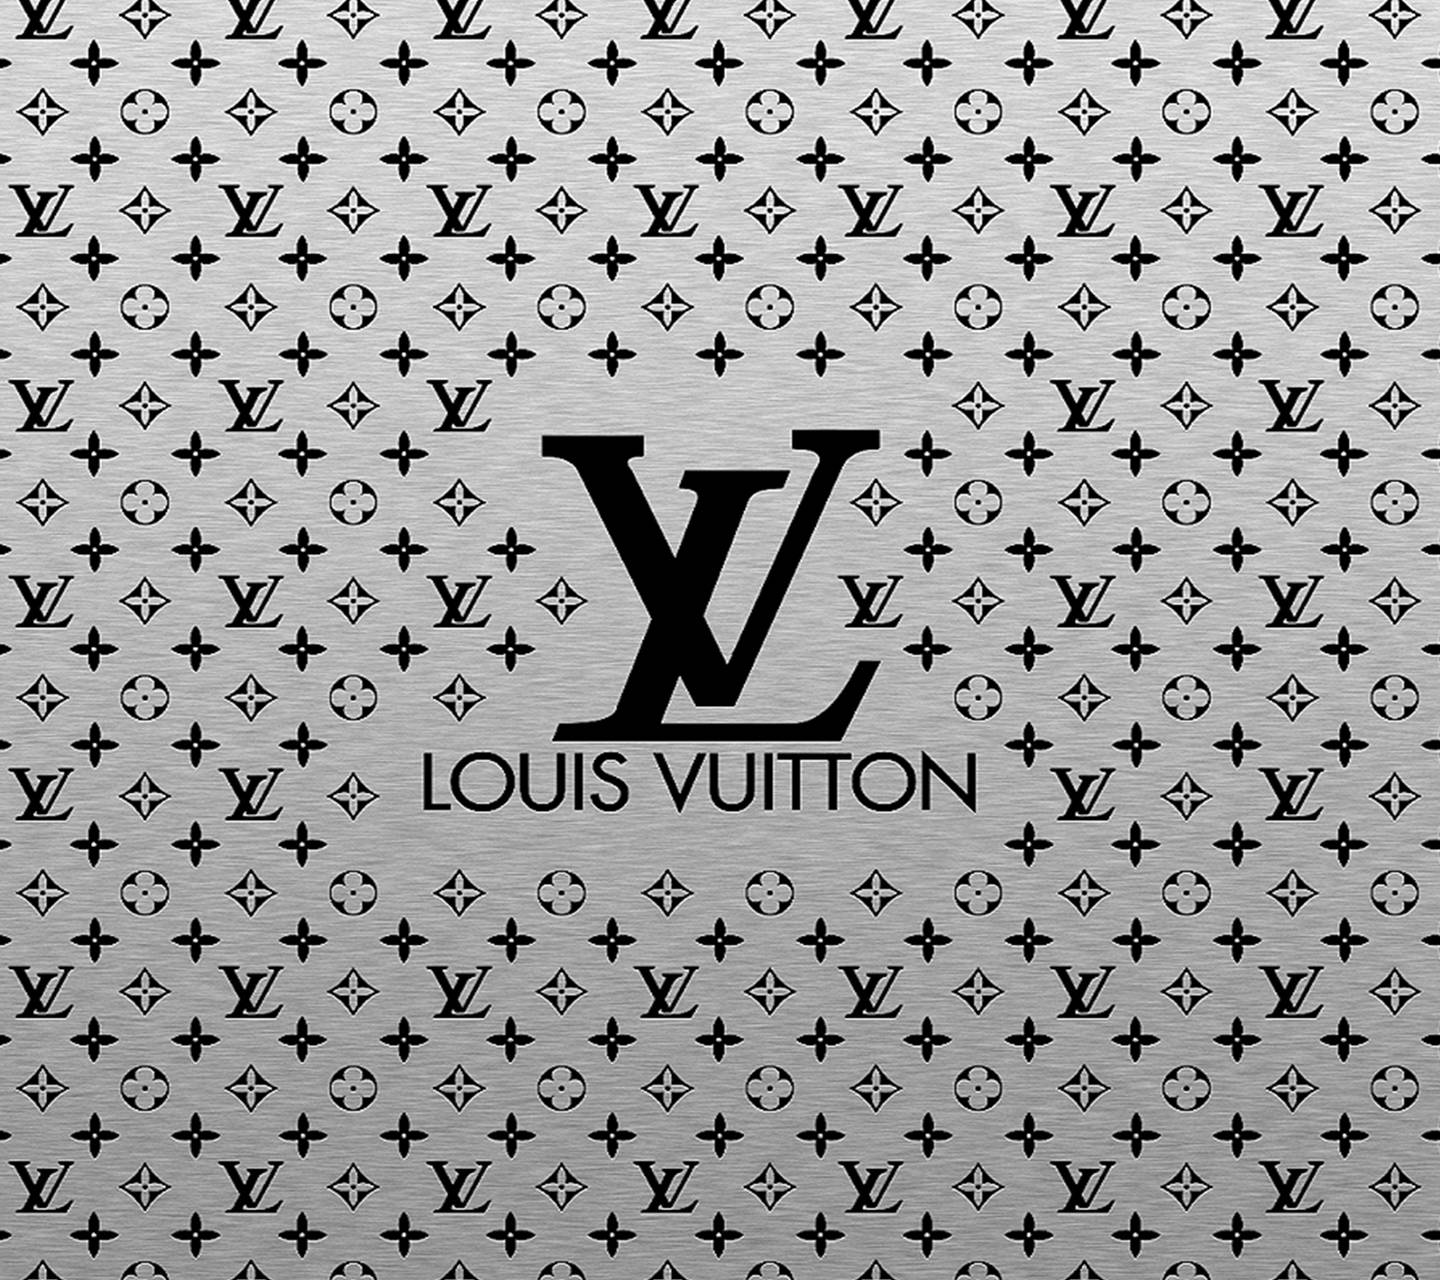 Download free louis vuitton wallpaper for your mobile phone